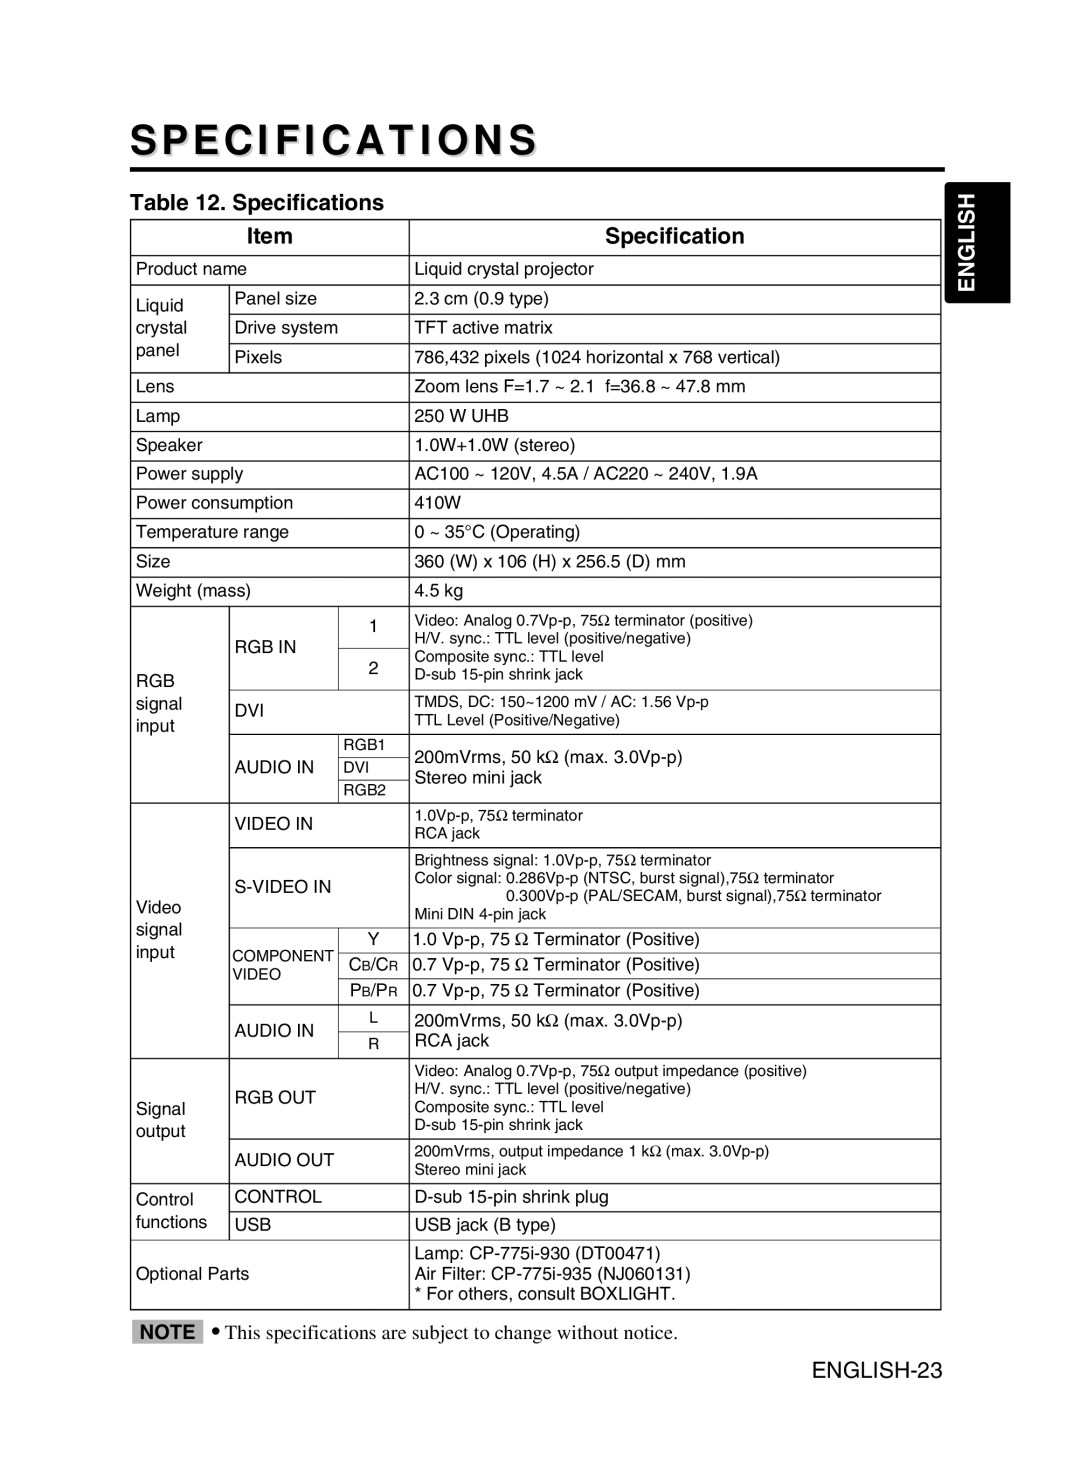 BOXLIGHT CP-775I user manual Specifications, ENGLISH-23, English 